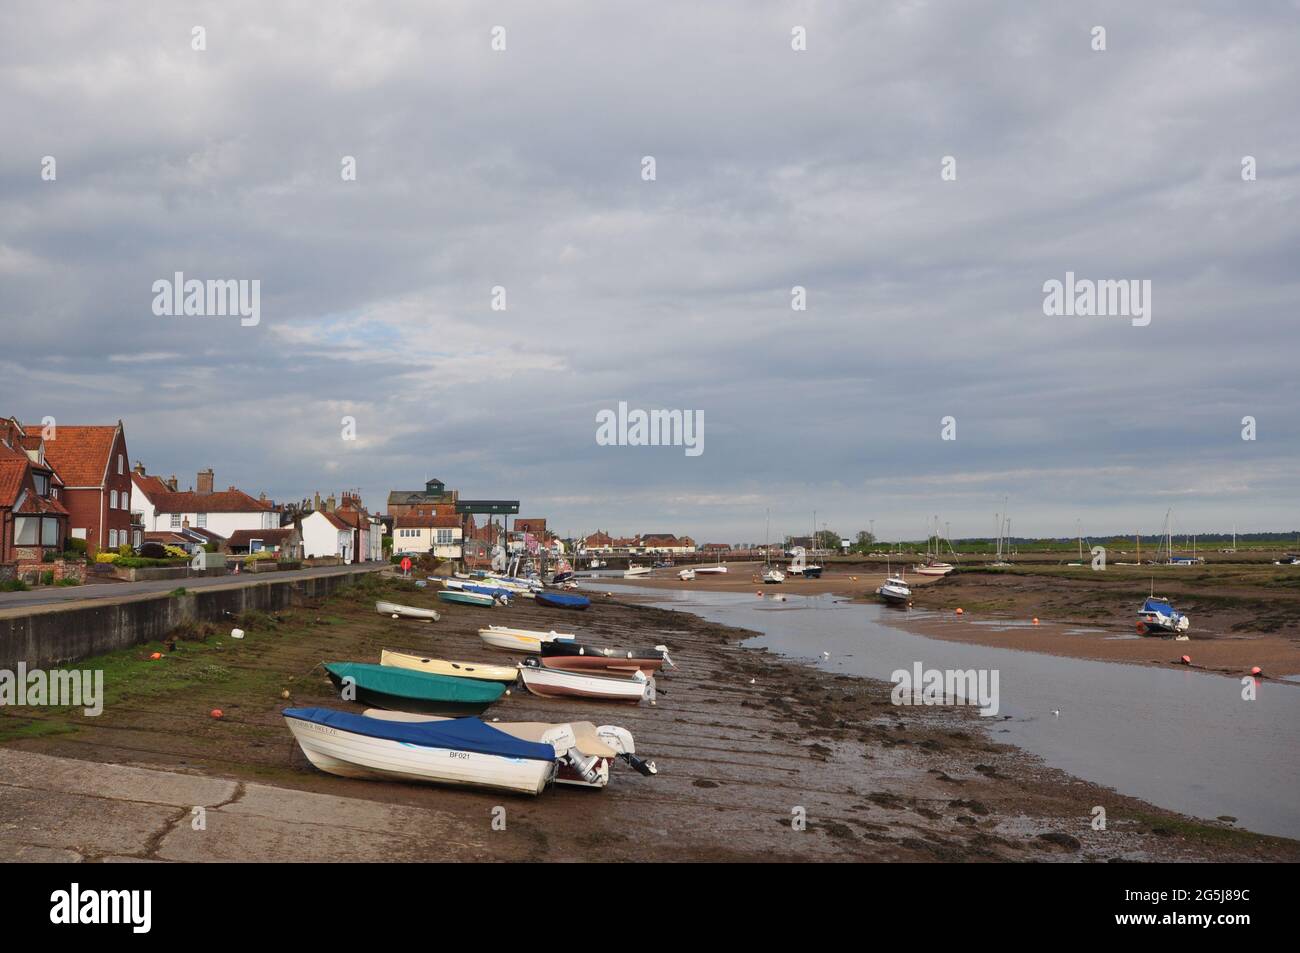 Well-Next-the-Sea, nord de Norfolk, Angleterre, Royaume-Uni Banque D'Images